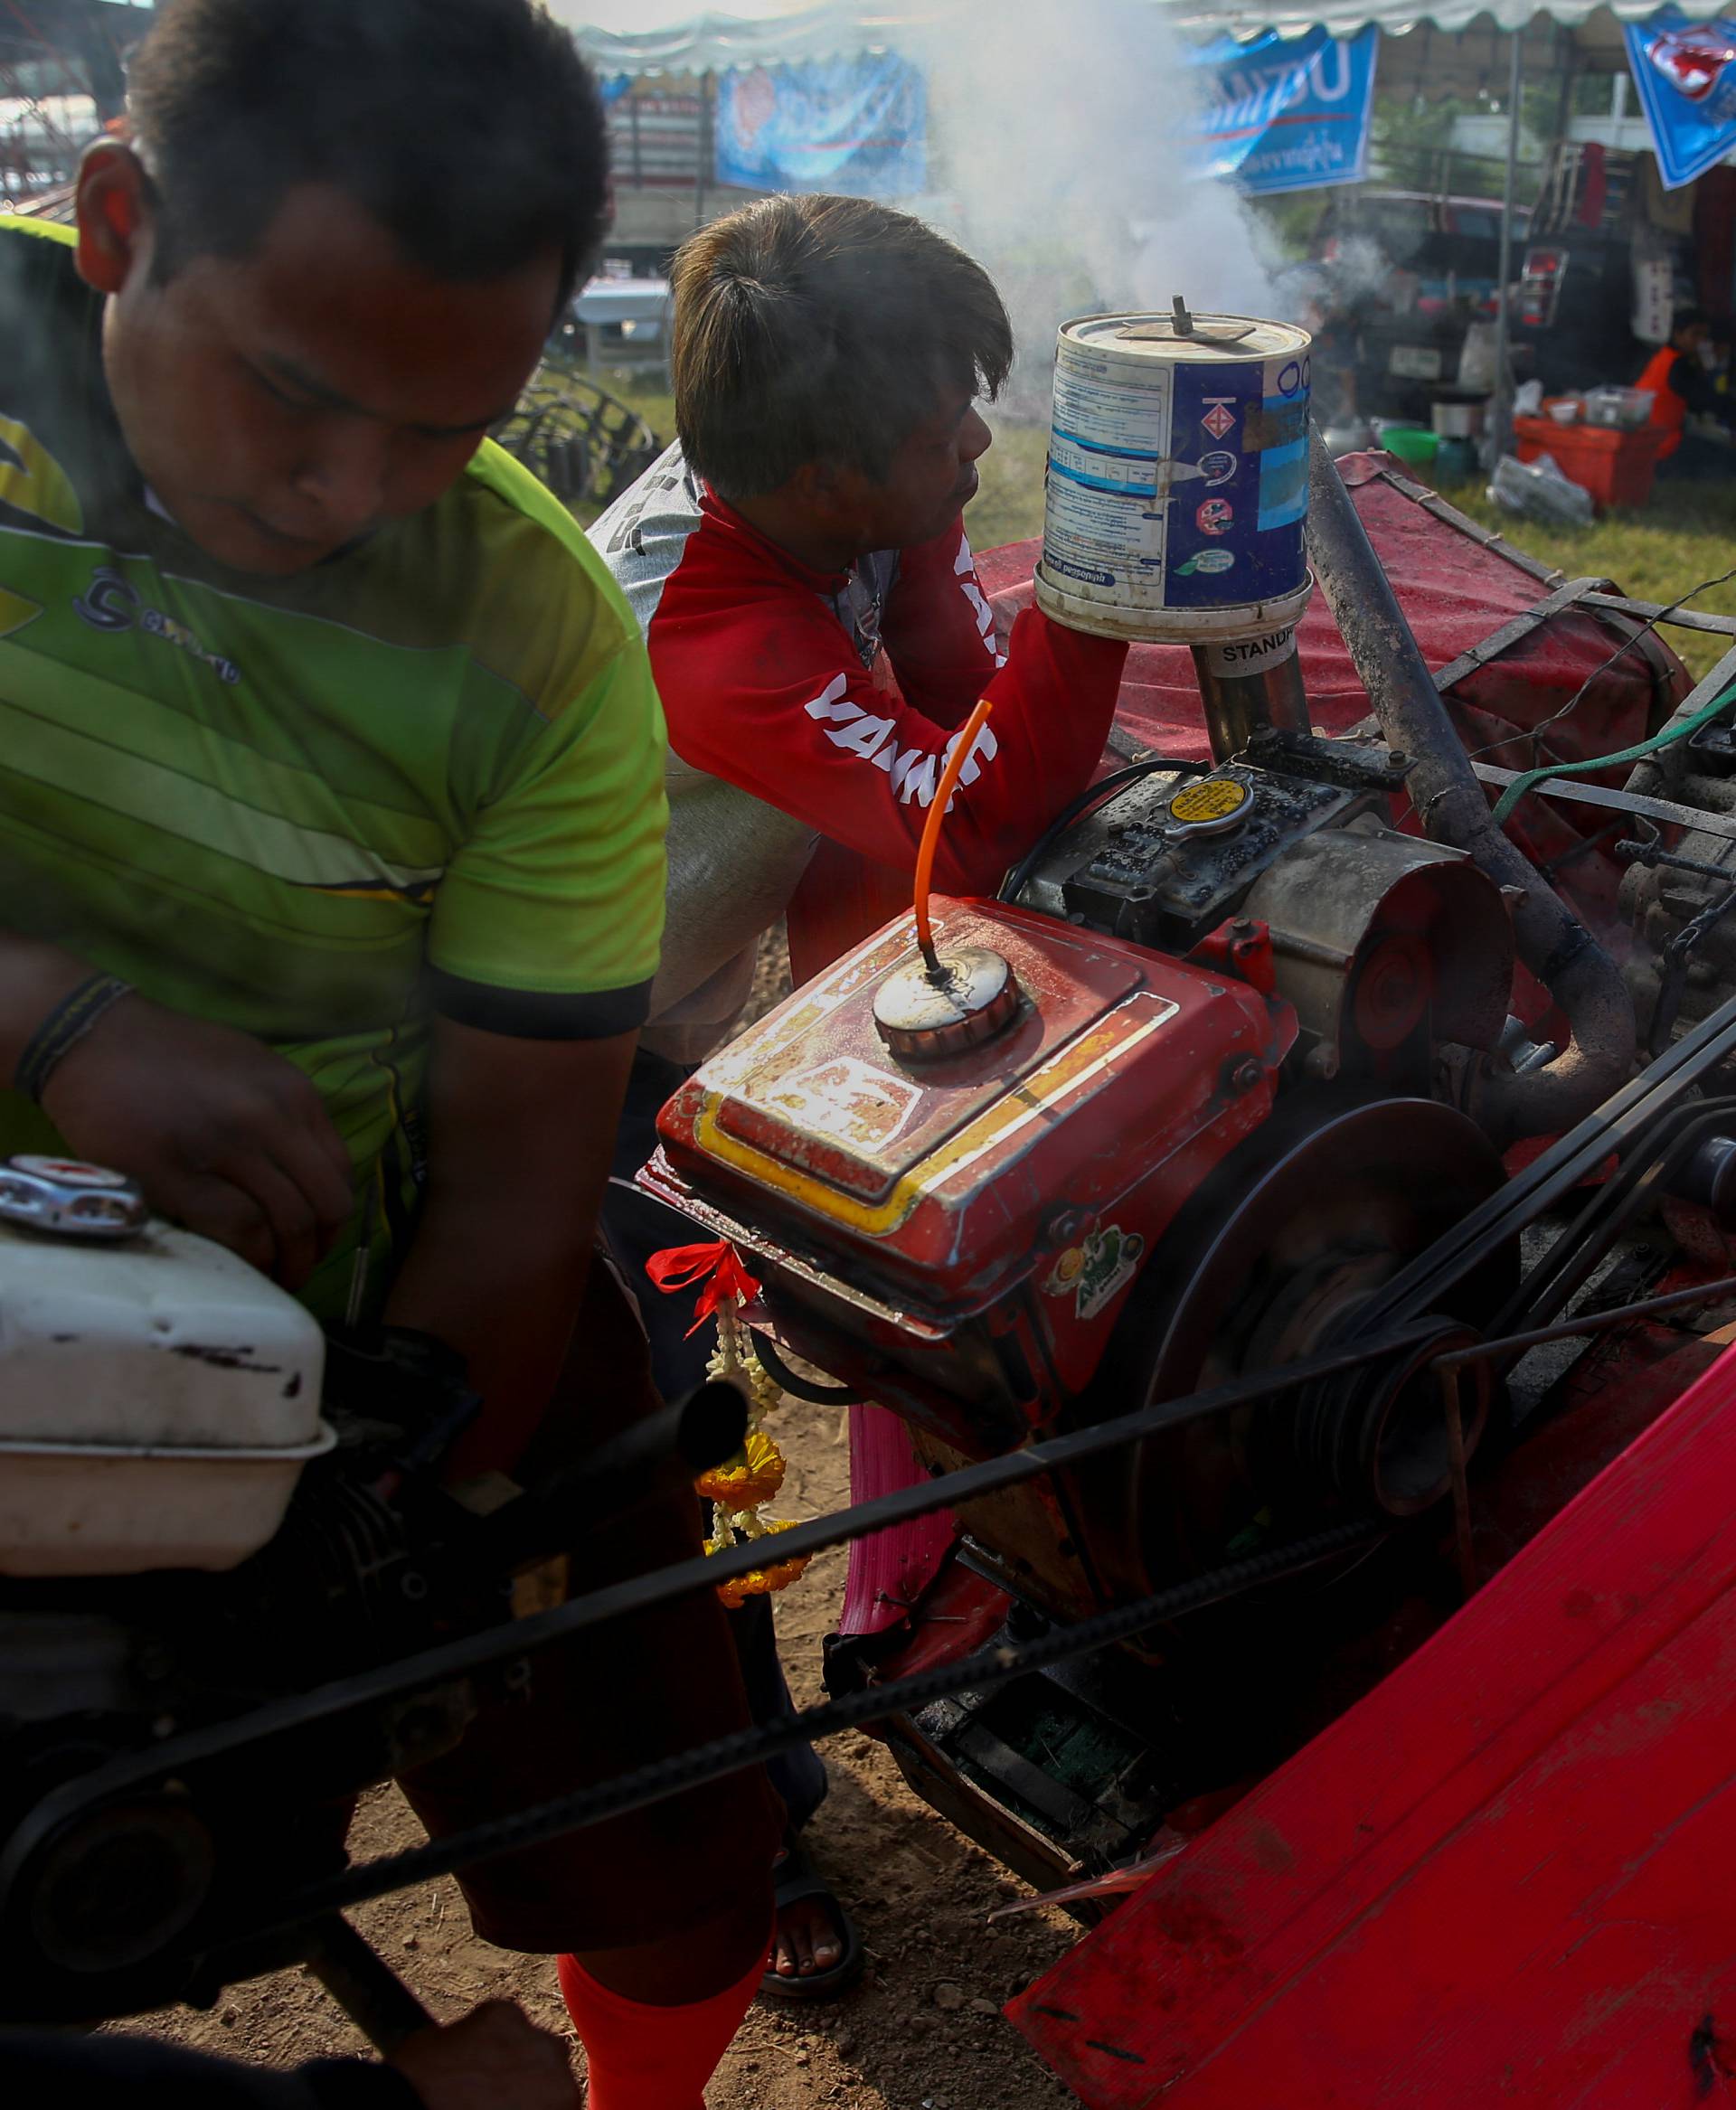 Team members work on an engine of modified tractor before a tractor race in Suphan Buri province